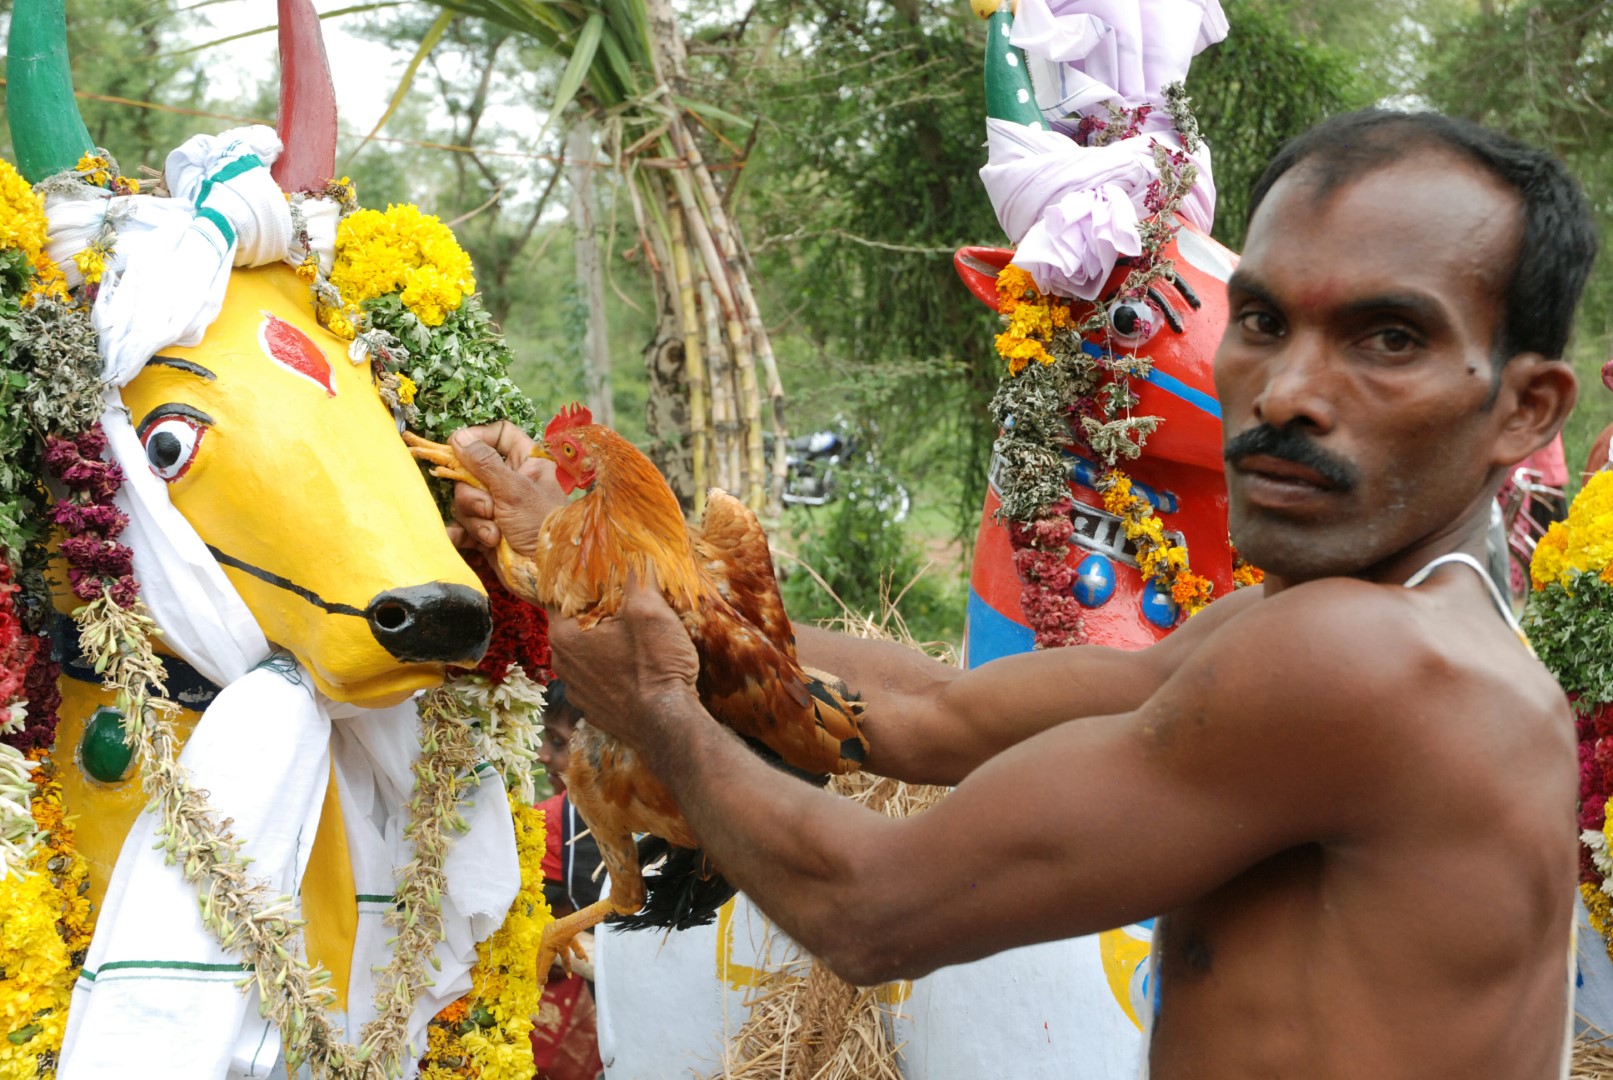 <span style="font-weight:normal;">One of the most important rituals of the festival is called <i>kaan torikal</i>, (literally "eye opening") and occurs just before the offerings are carried into the shrine. <i>Kaan torikal</i> is performed by the chief potter for the festival, who dabs a drop of fresh rooster blood onto the eyes of the principal offerings and by doing so, gives them life. Only then are the previously inanimate statues worthy to enter the shrine and find a place next to their god.</span>